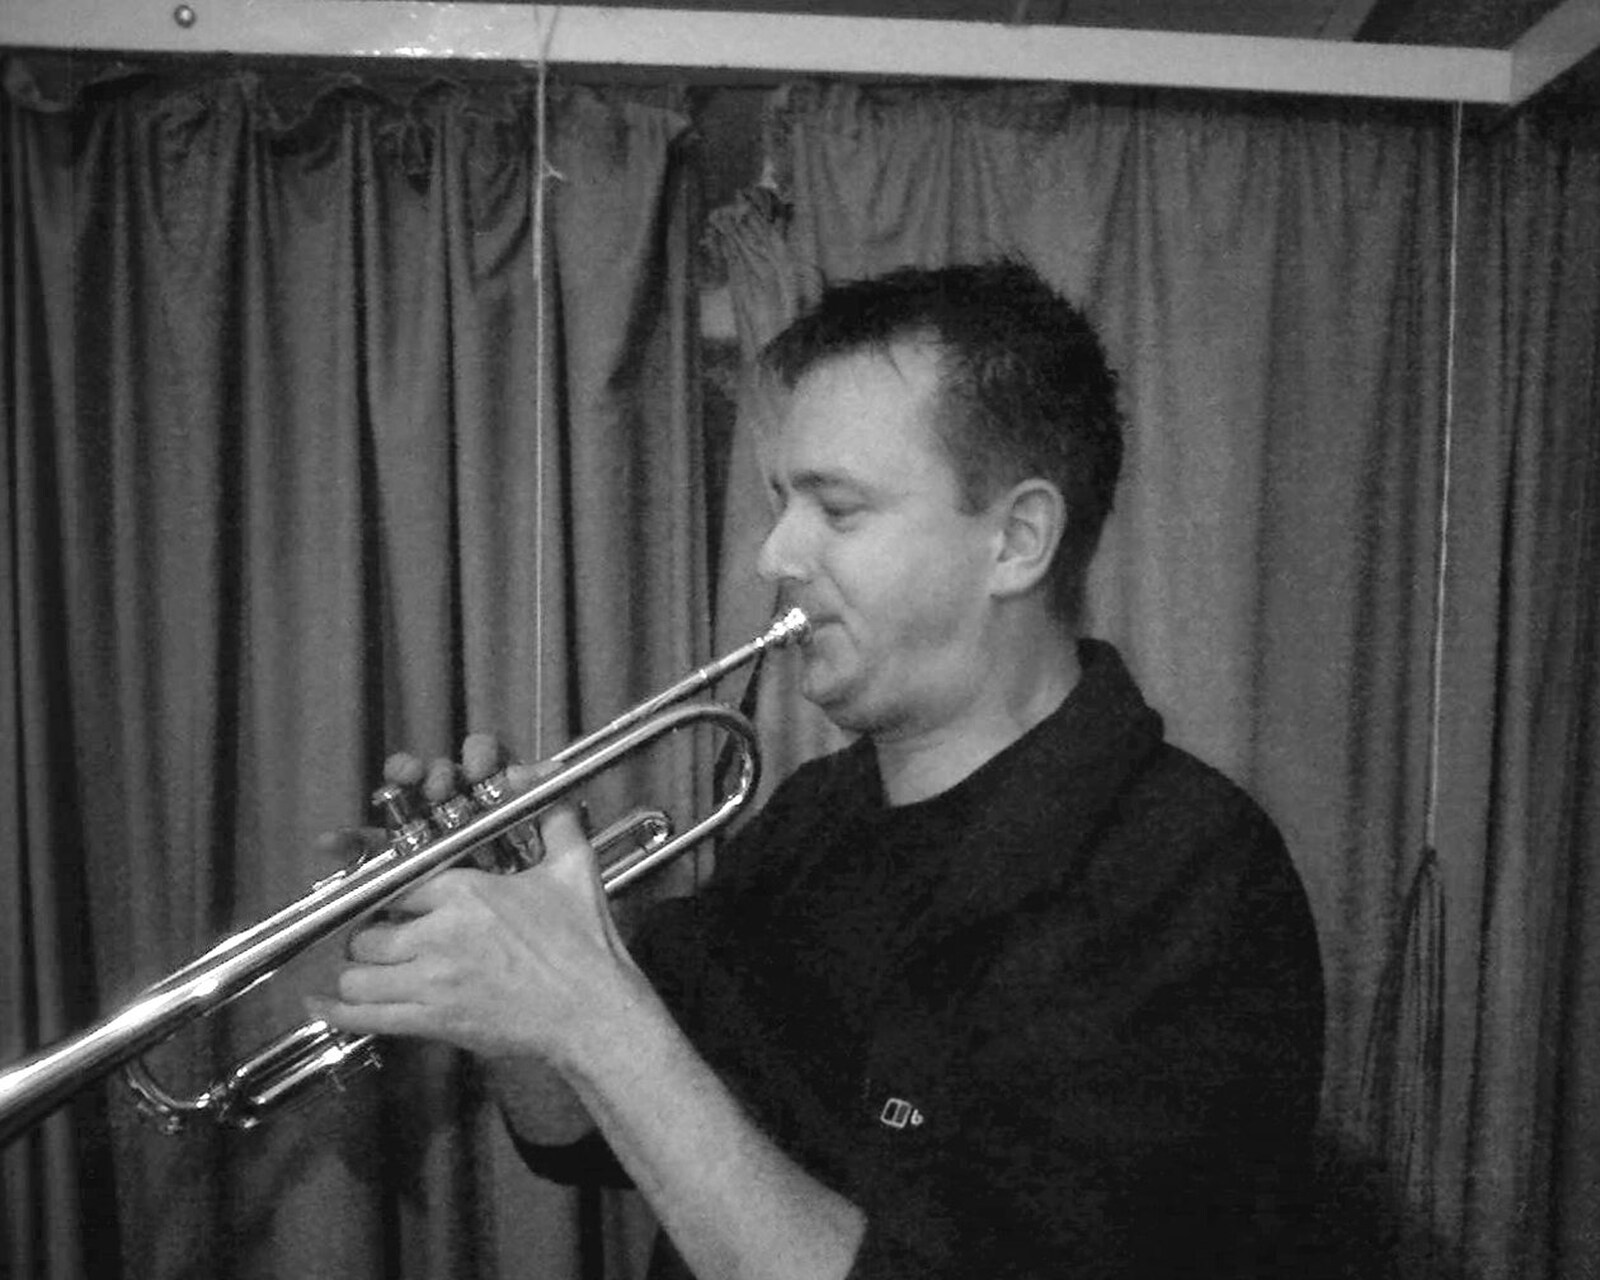 Nosher on trumpet from The BBs' Rock'n'Roll Life, Kenninghall, Norfolk - 2nd December 2005